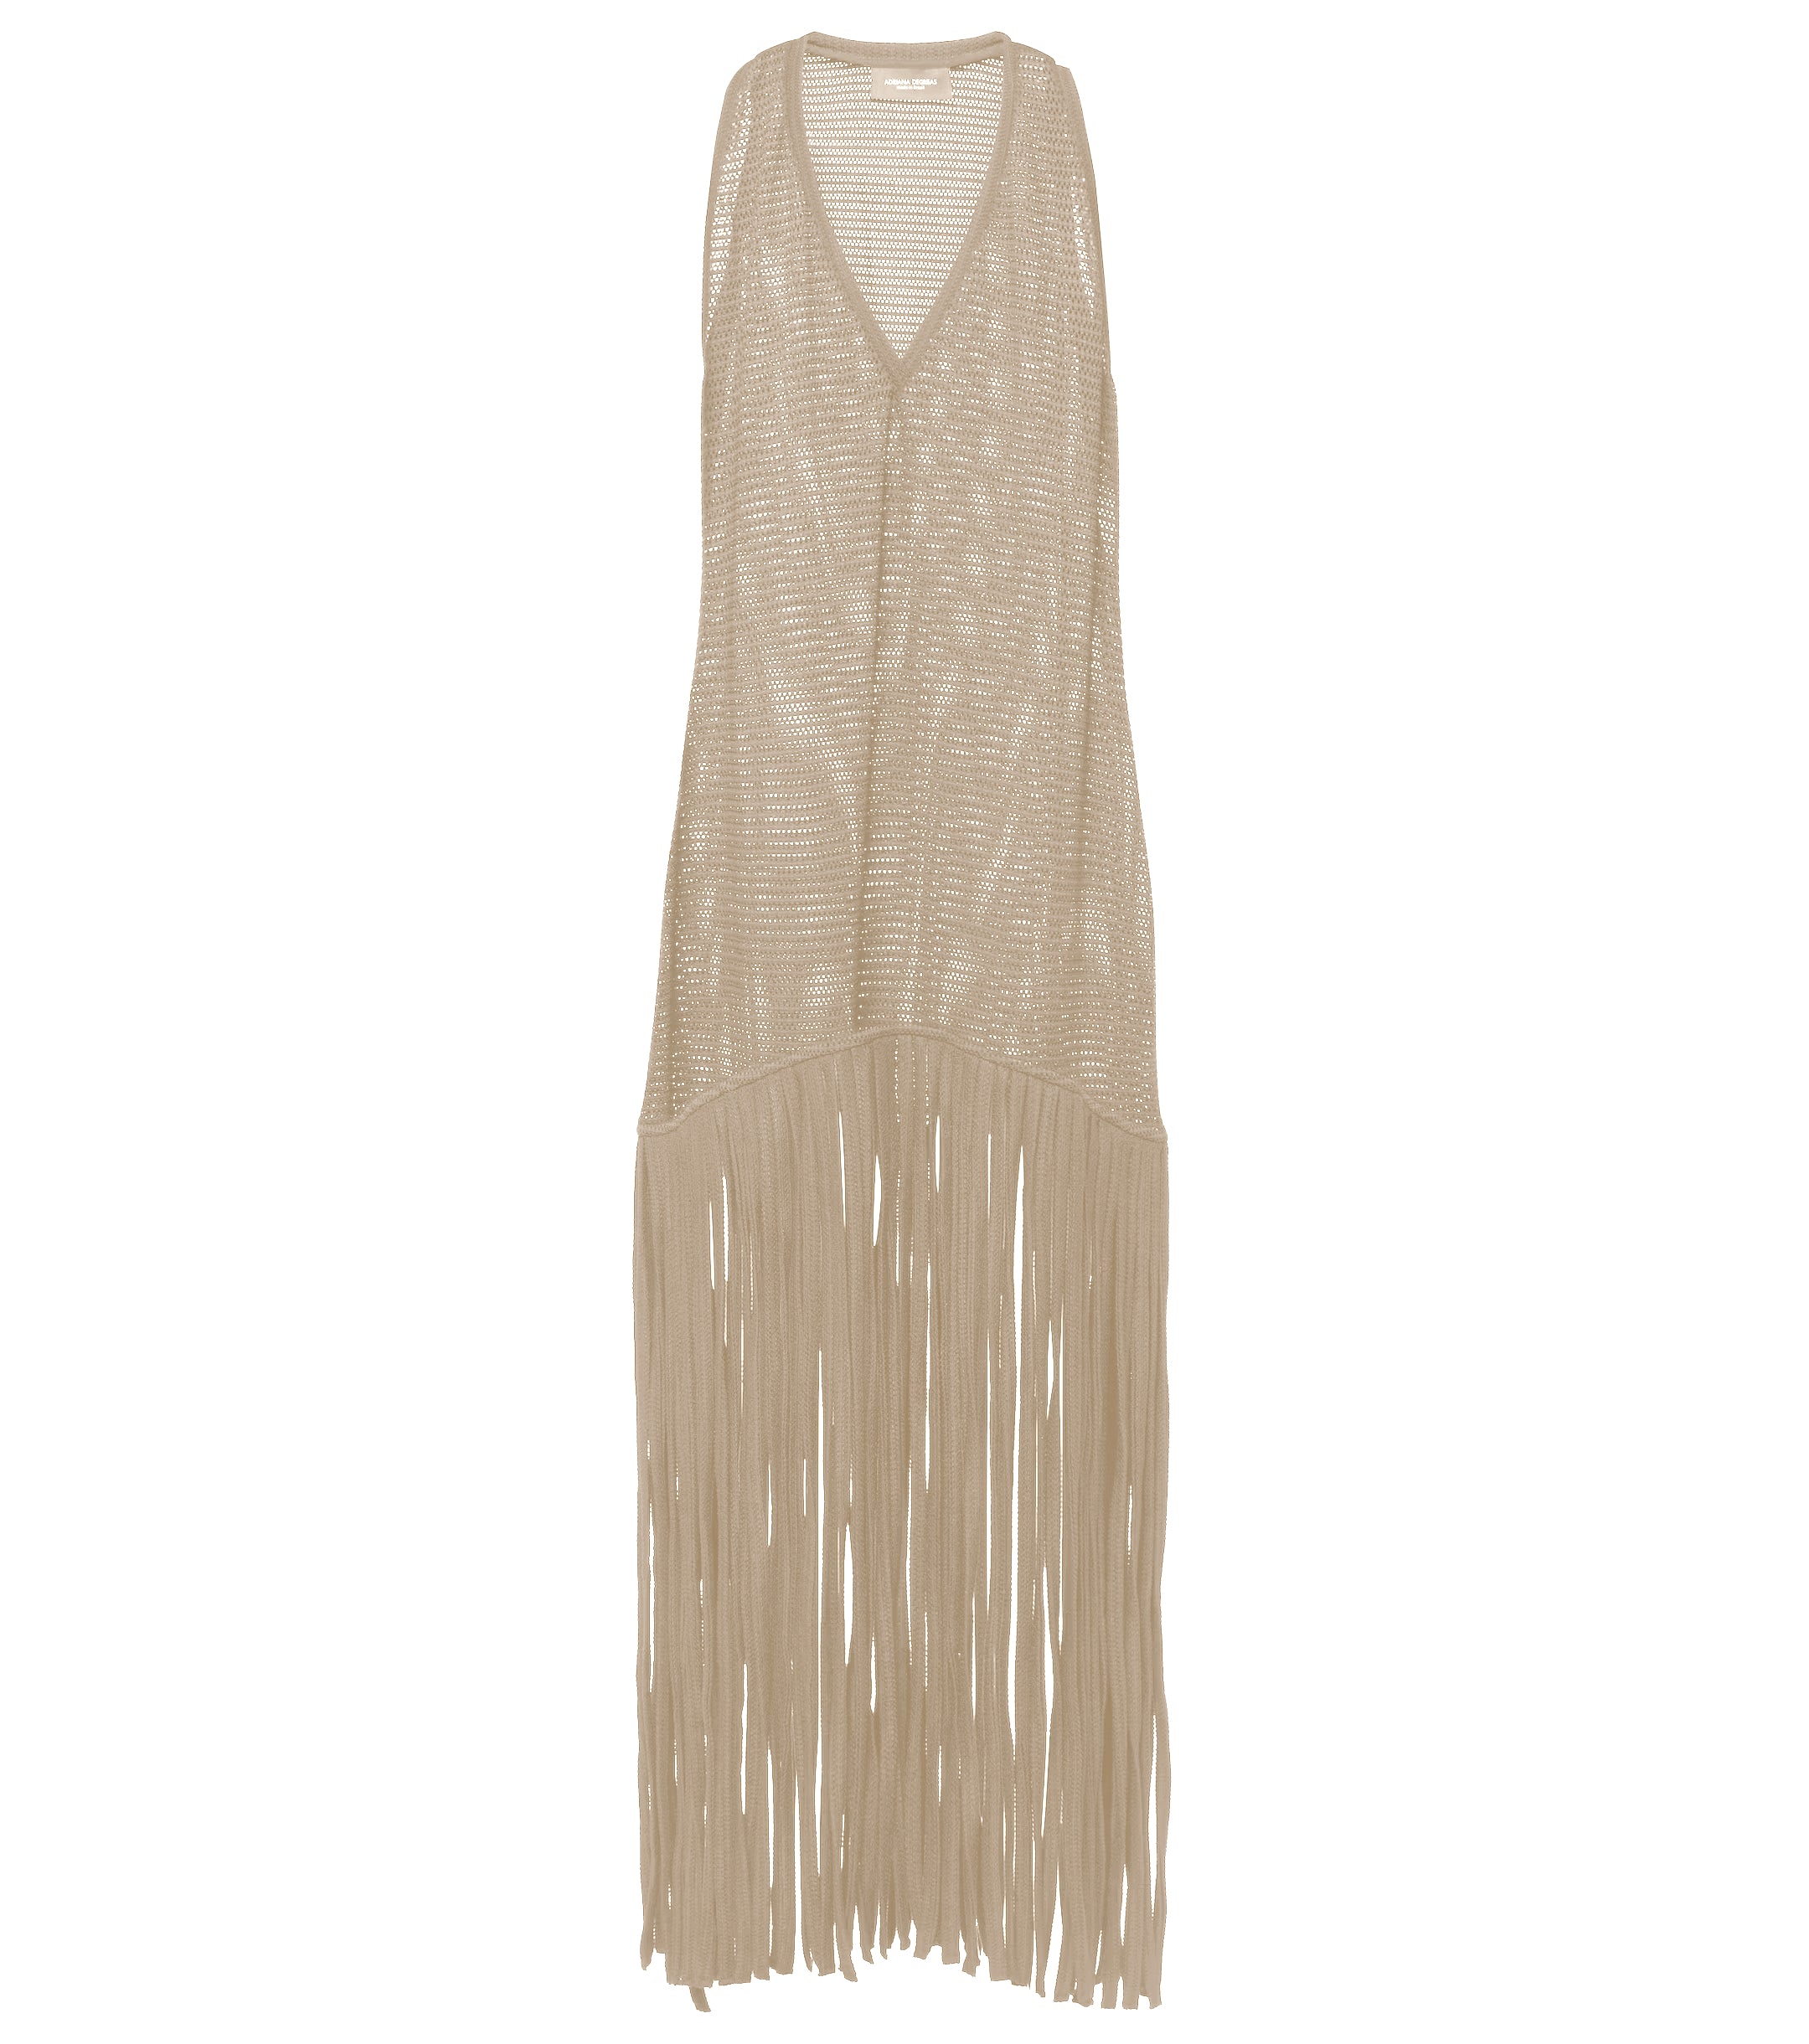 Tricot Beige Knit Long Dress with Fringes Product